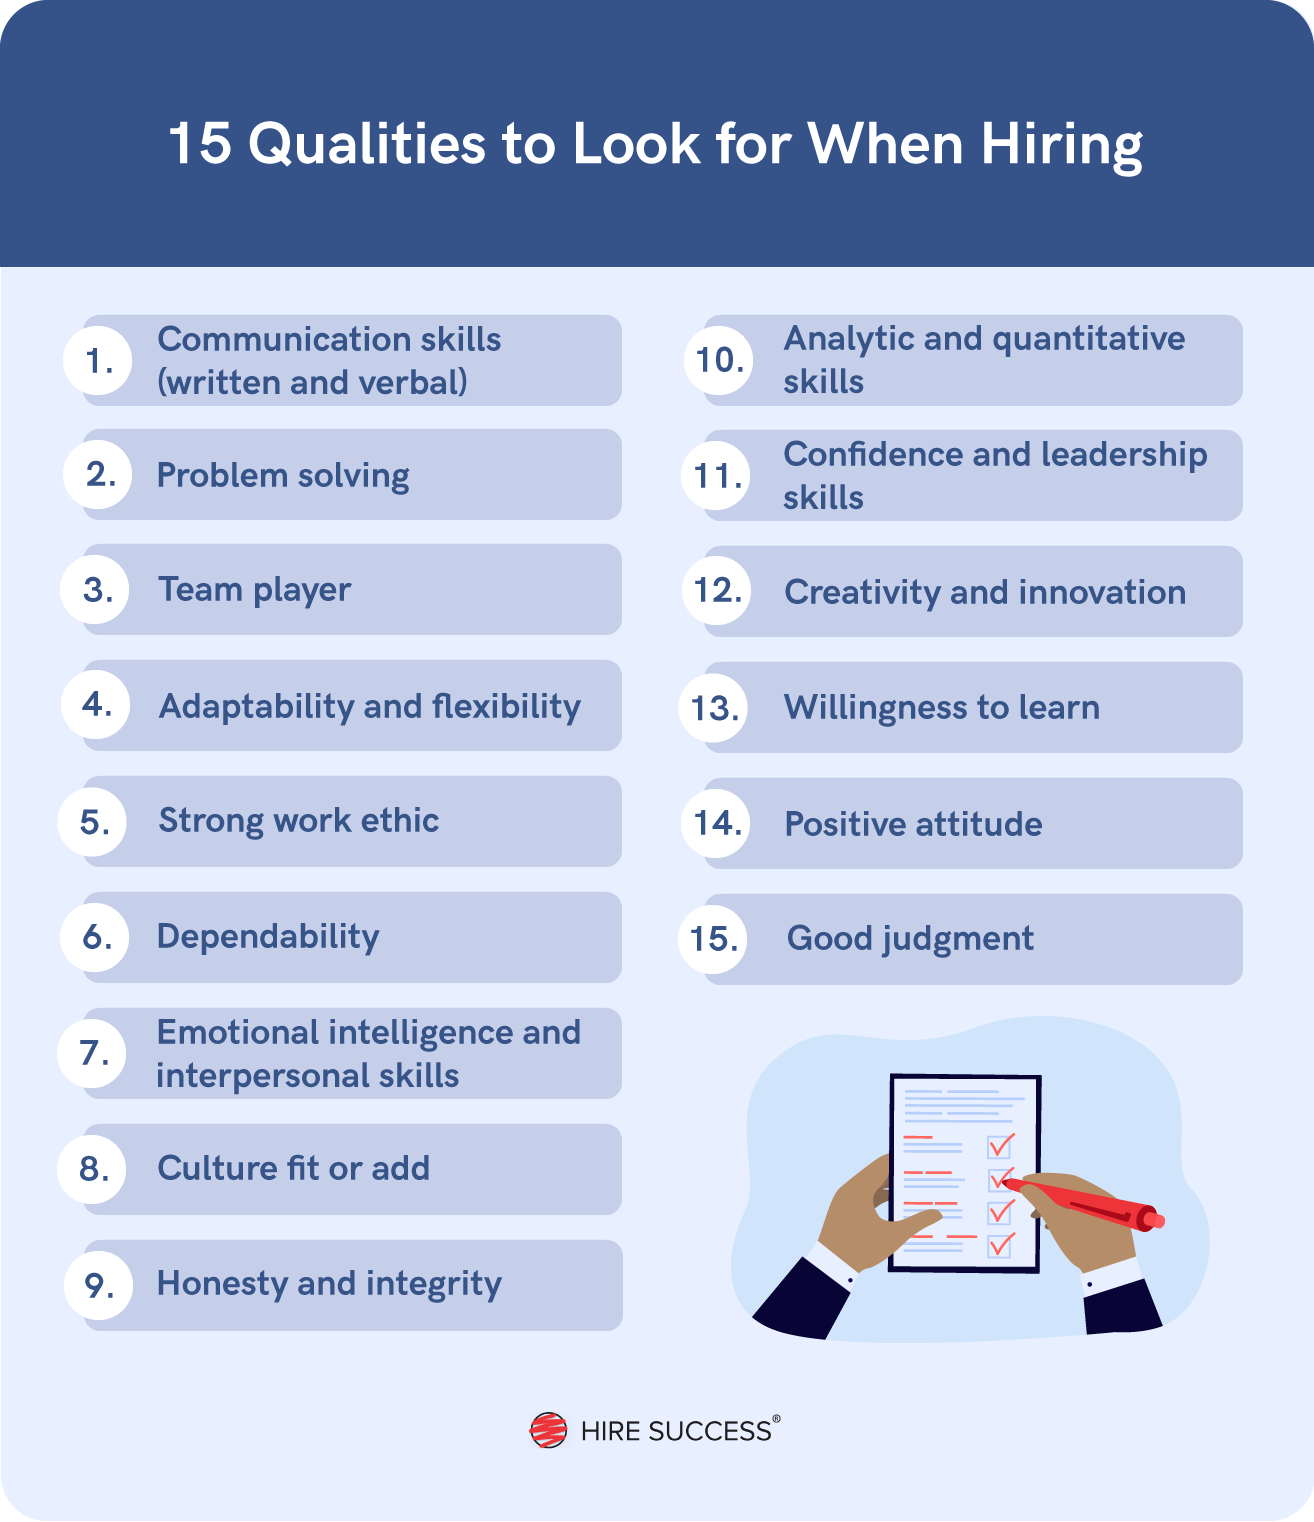 Qualities employers look for in potential employees.